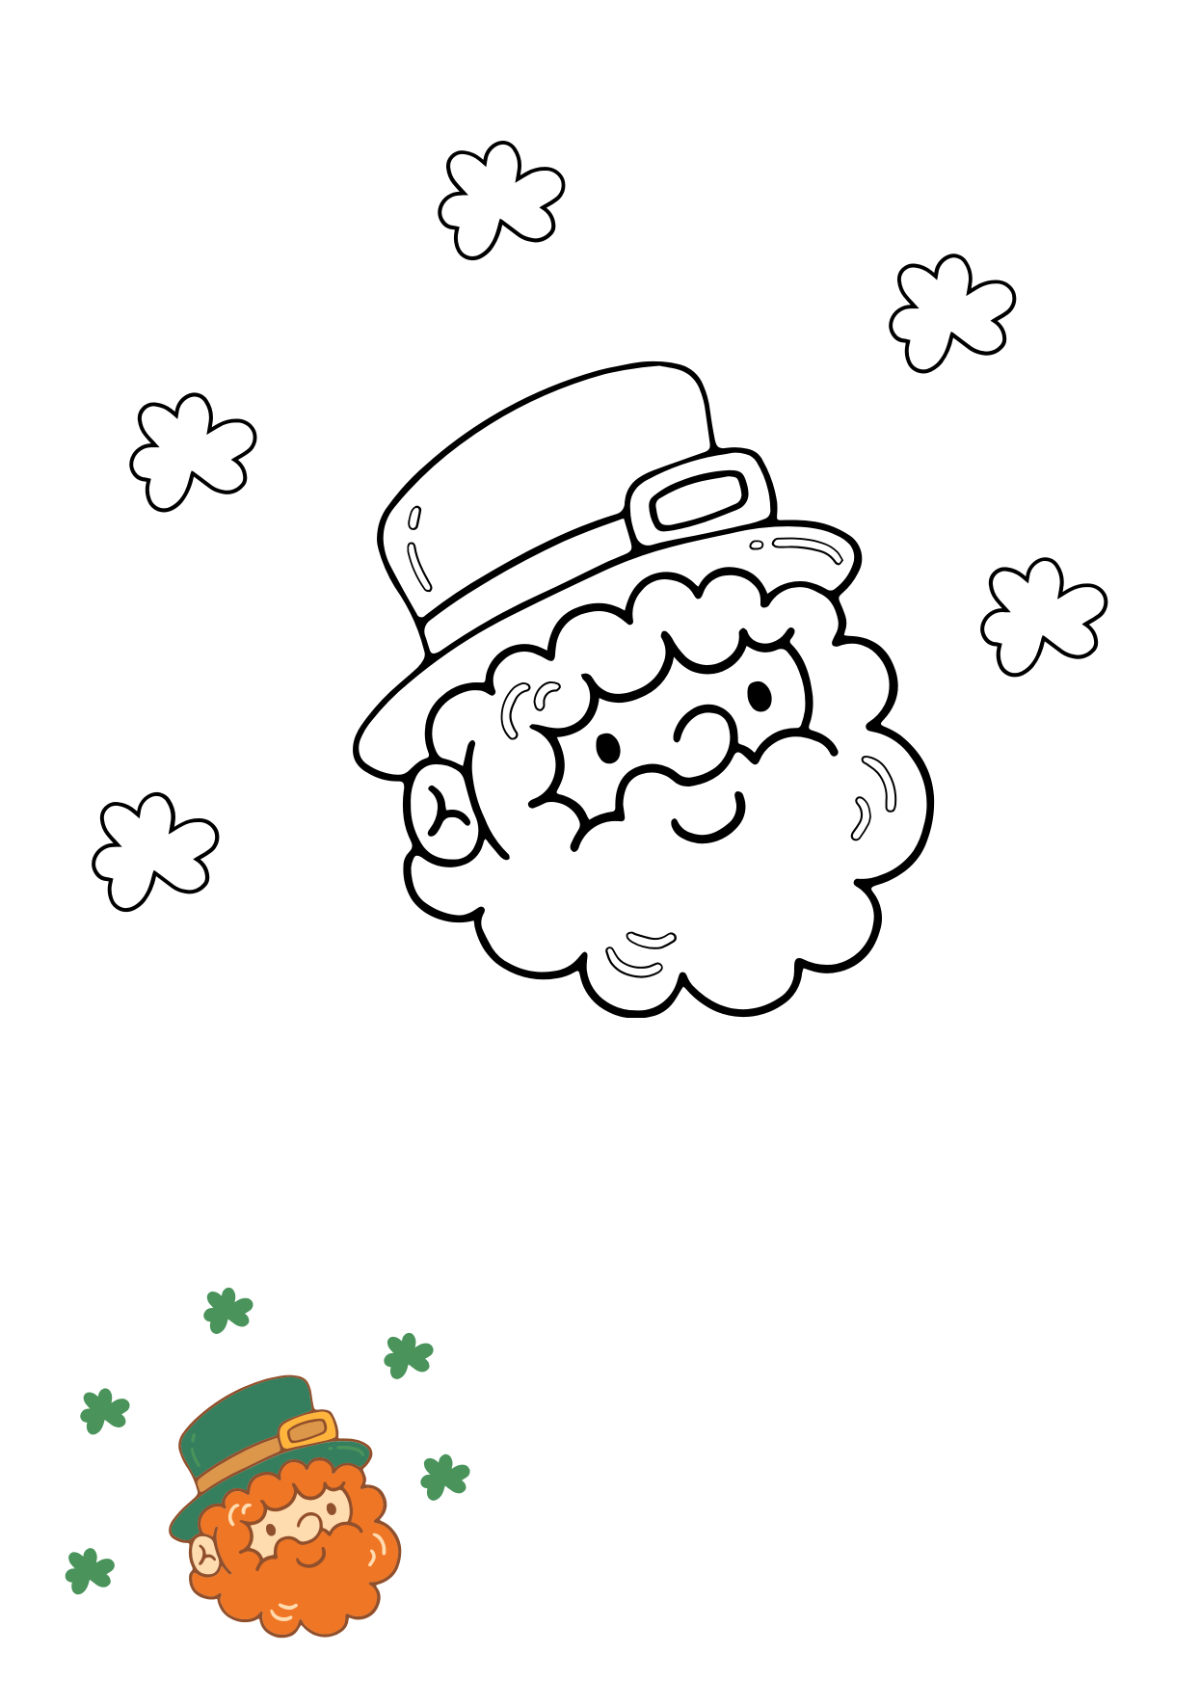 Free Cute St. Patrick’s Day Coloring Page Template